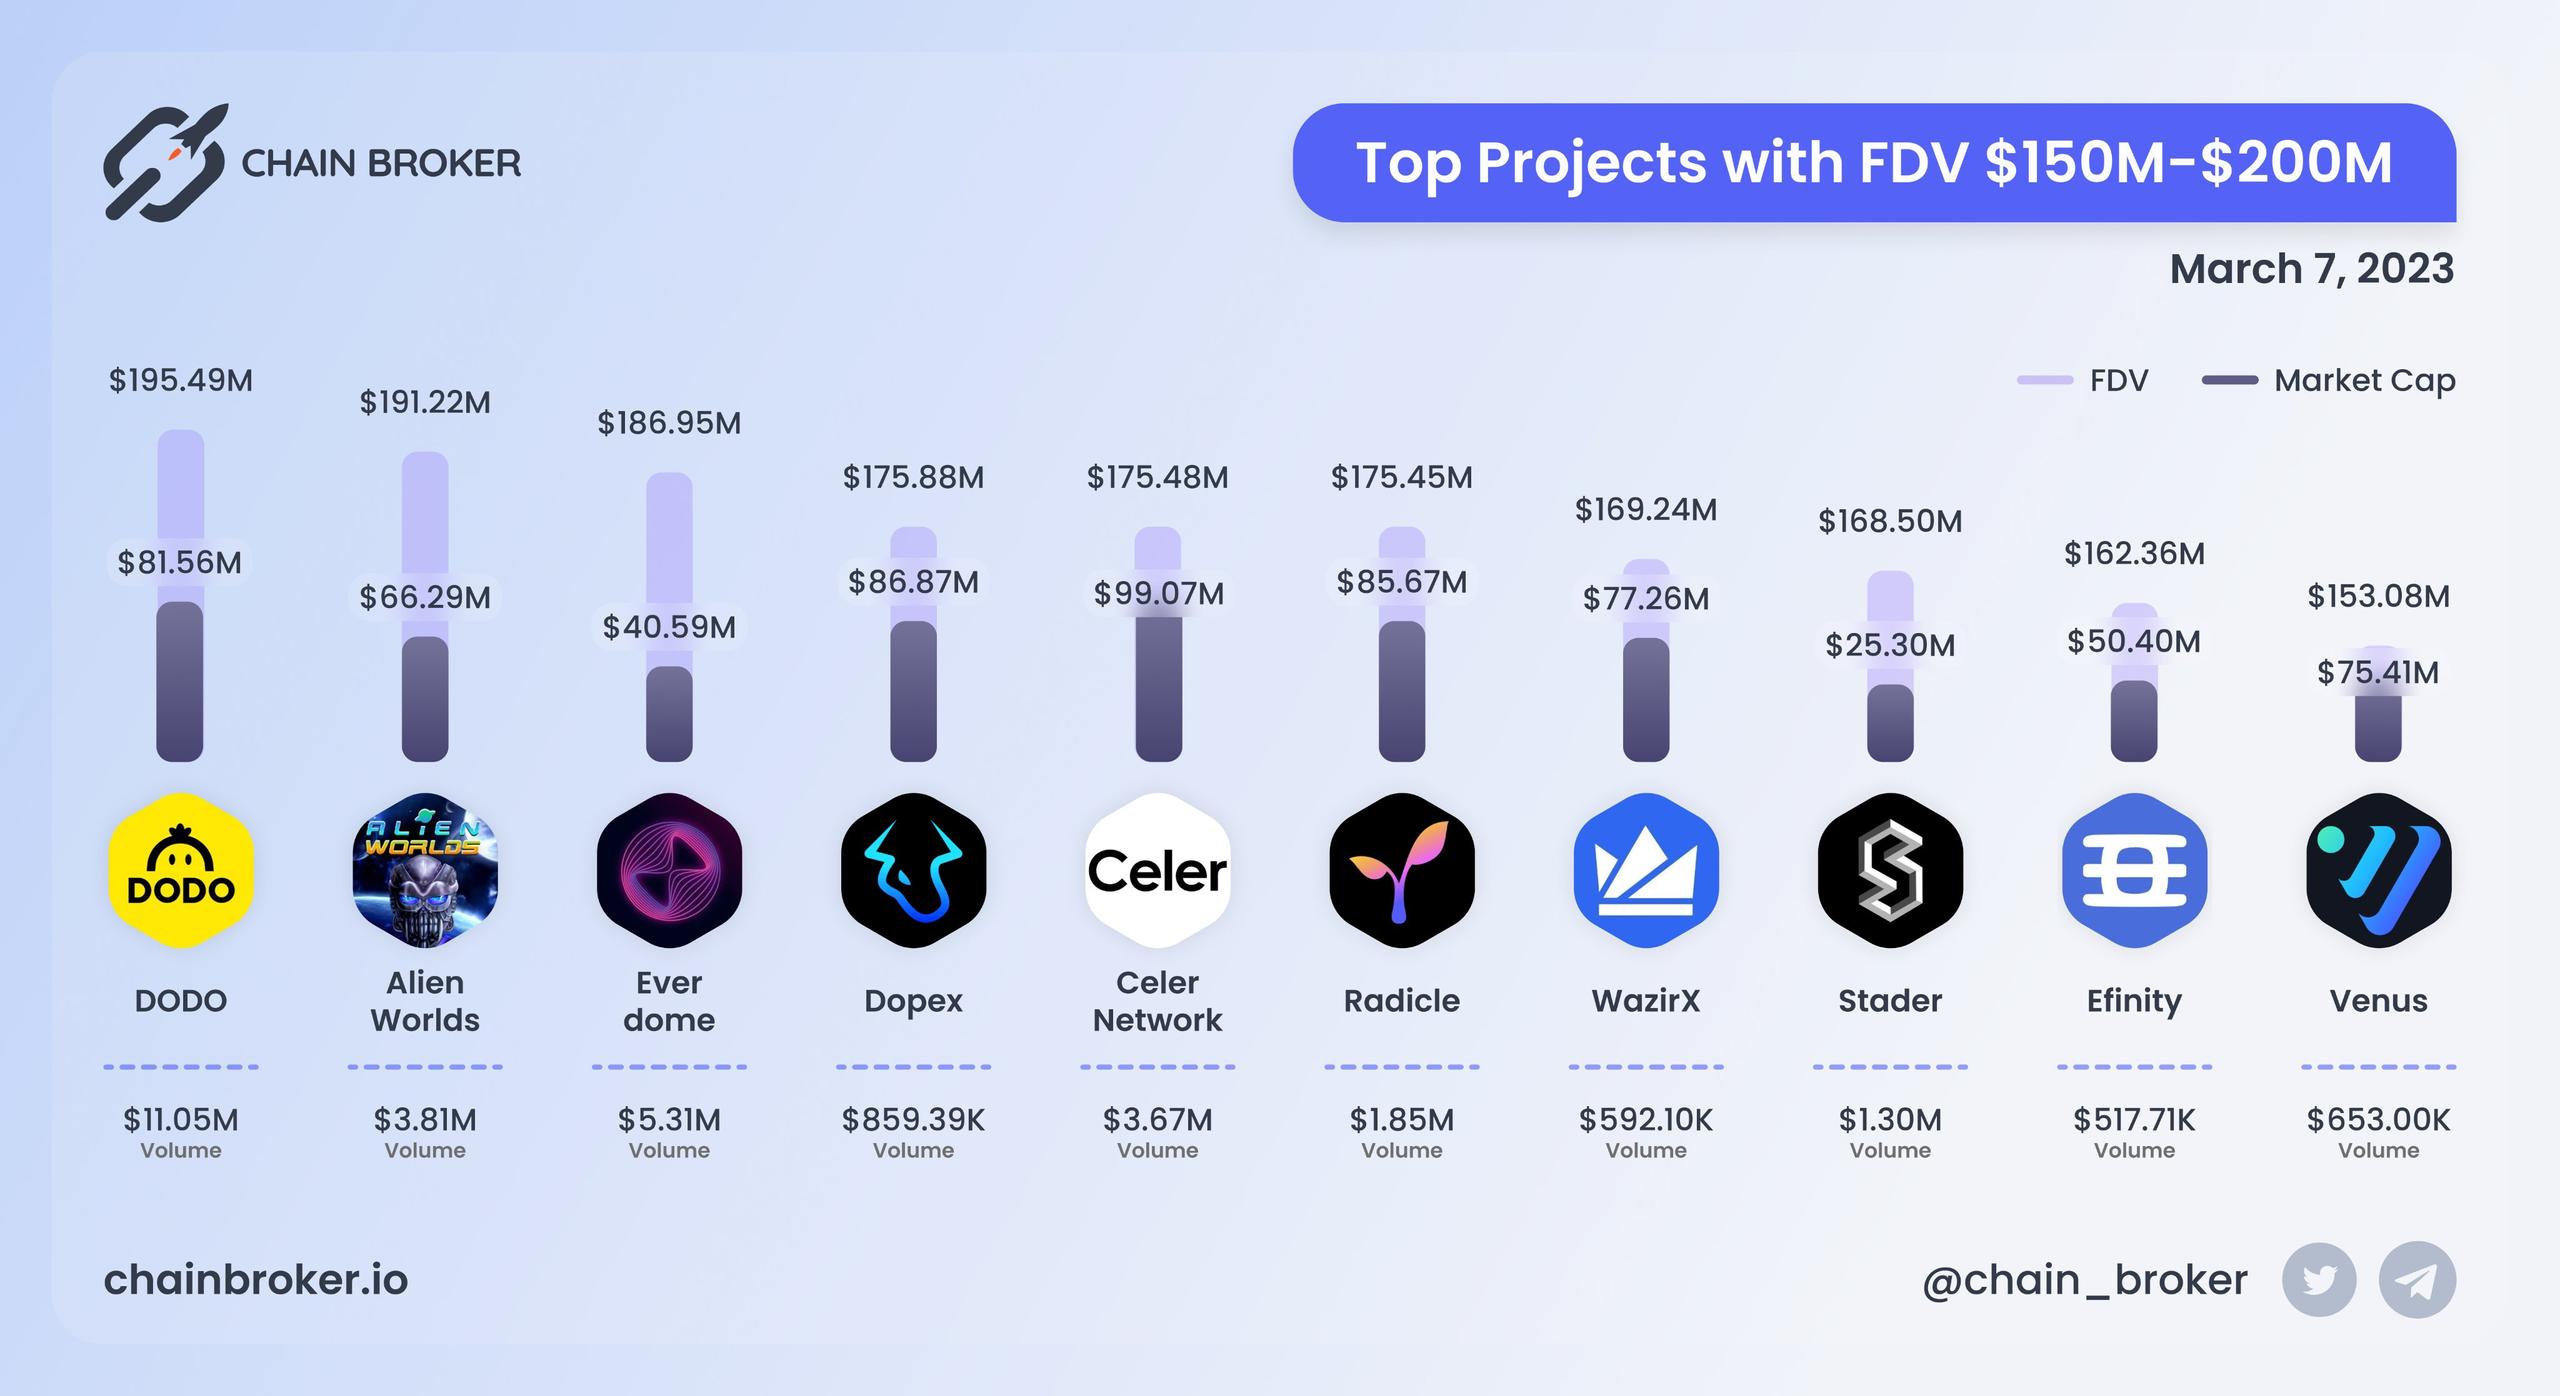 Top projects with FDV $150M - $200M